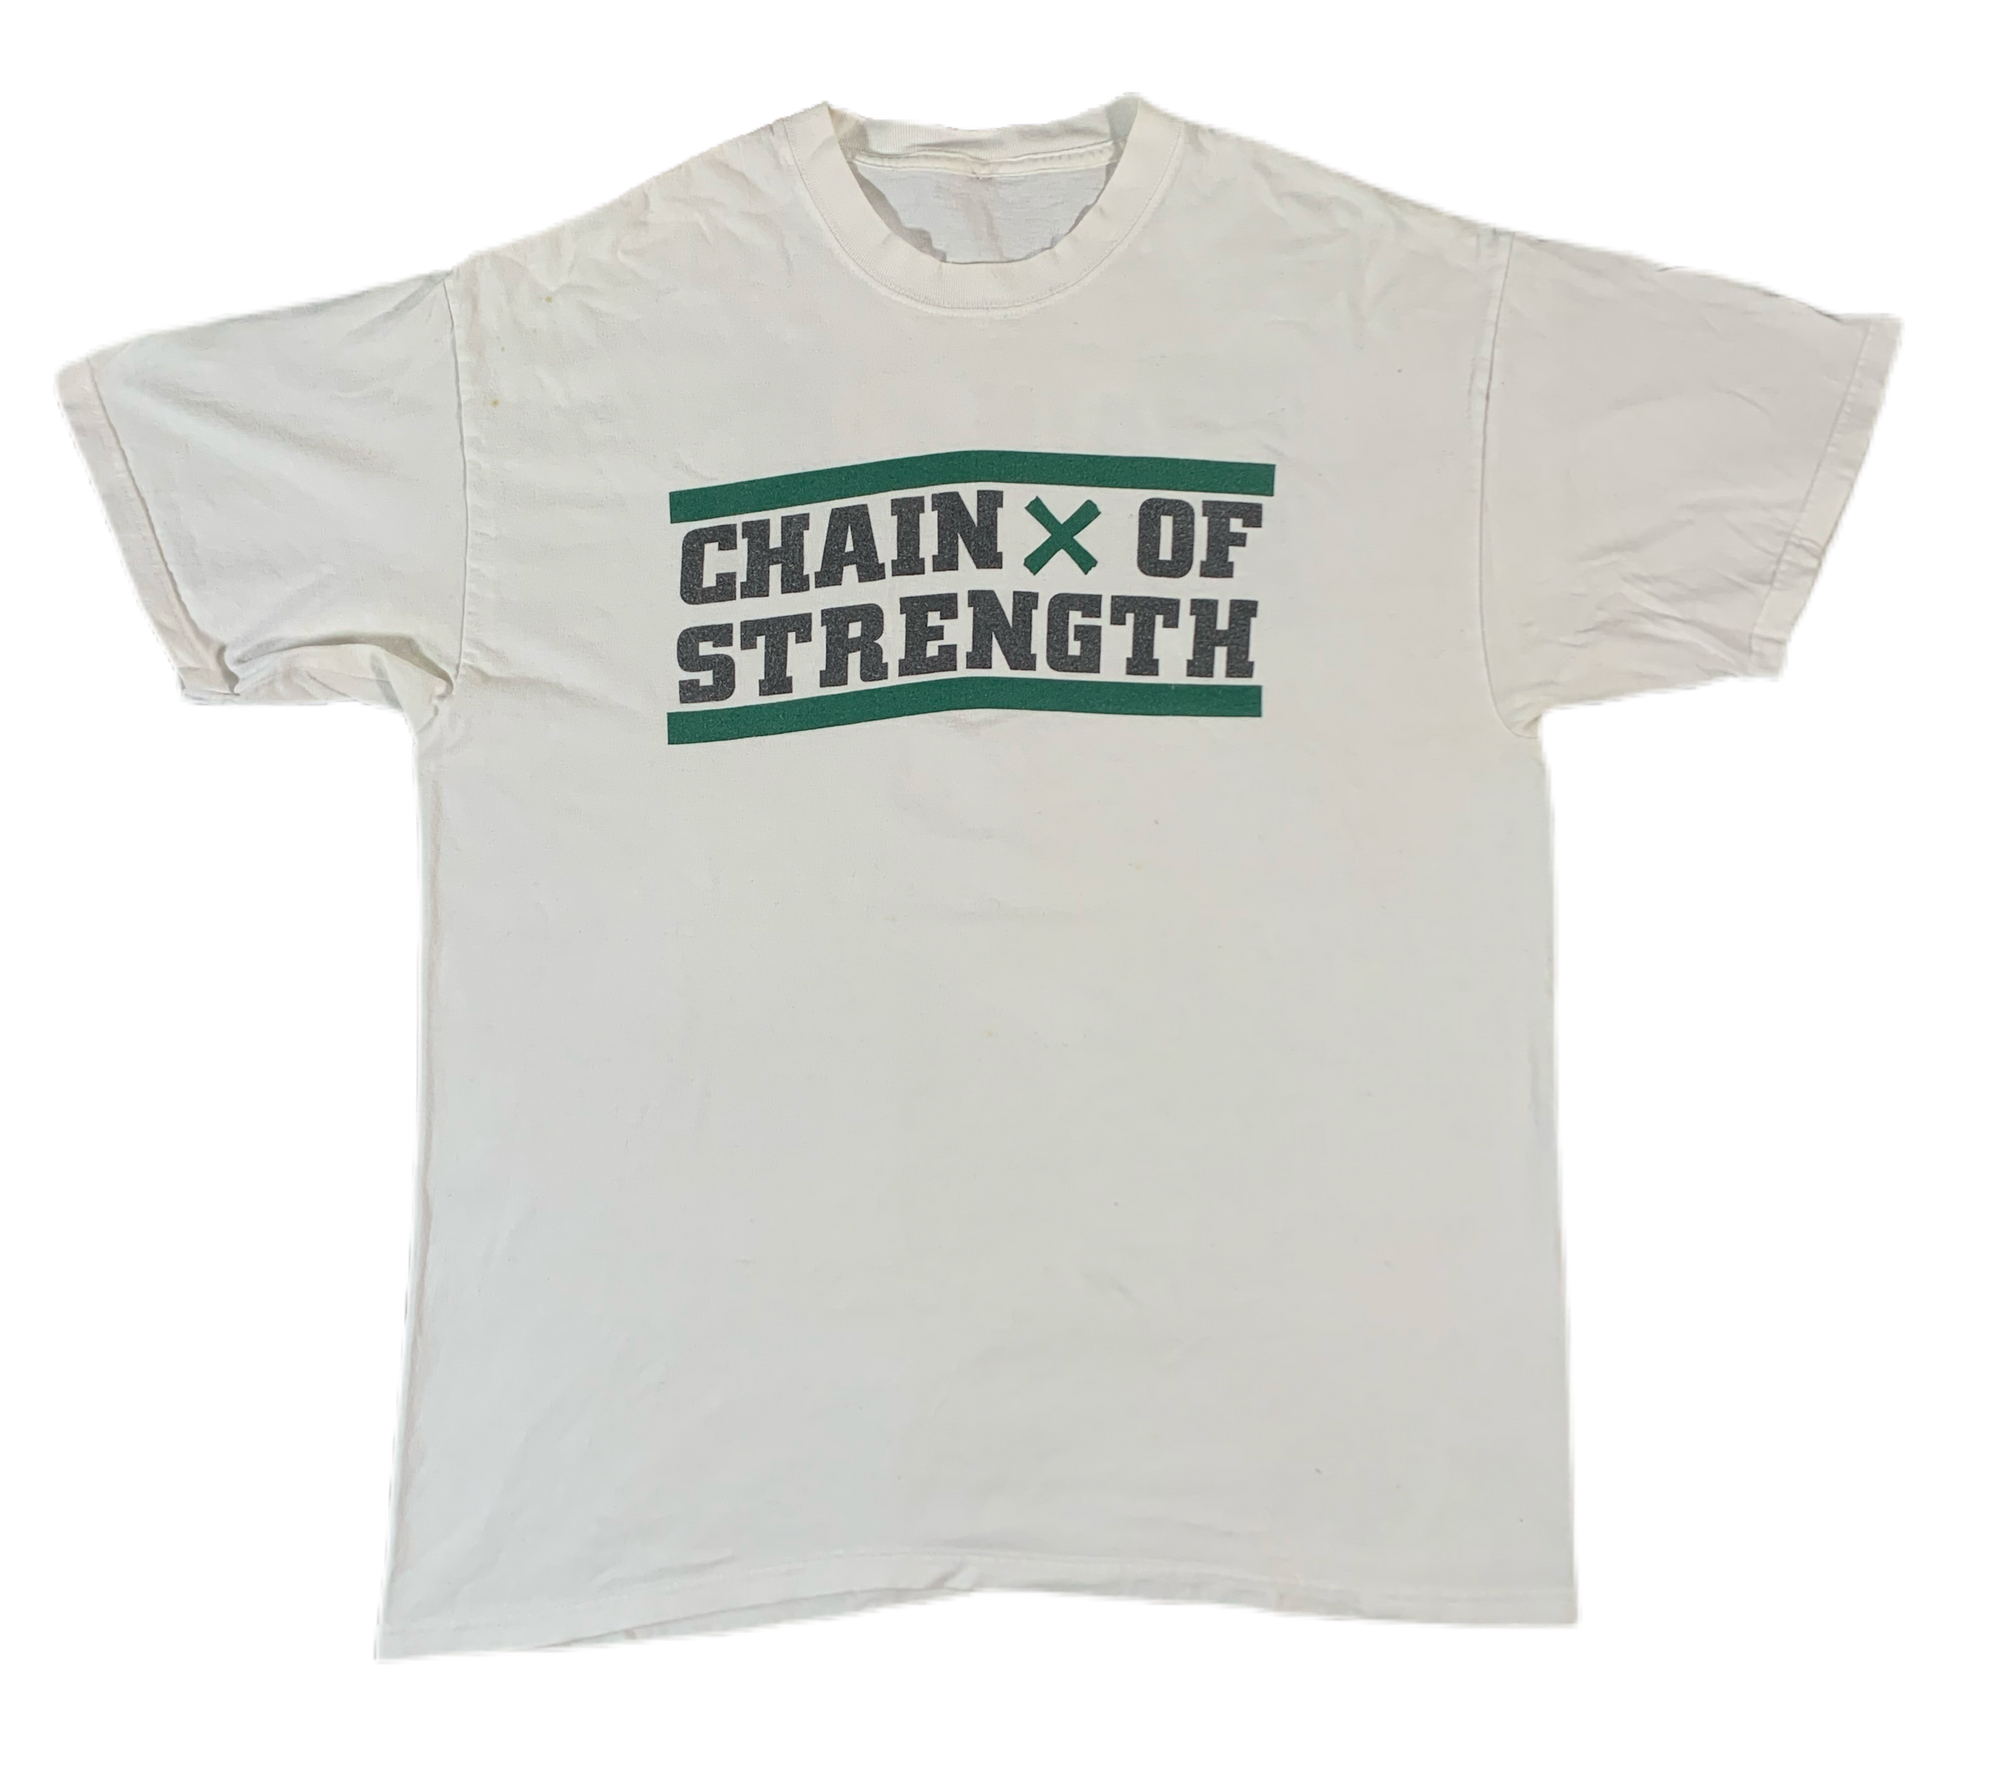 Vintage Chain Of Strength "What Holds Us Apart" T-Shirt - jointcustodydc